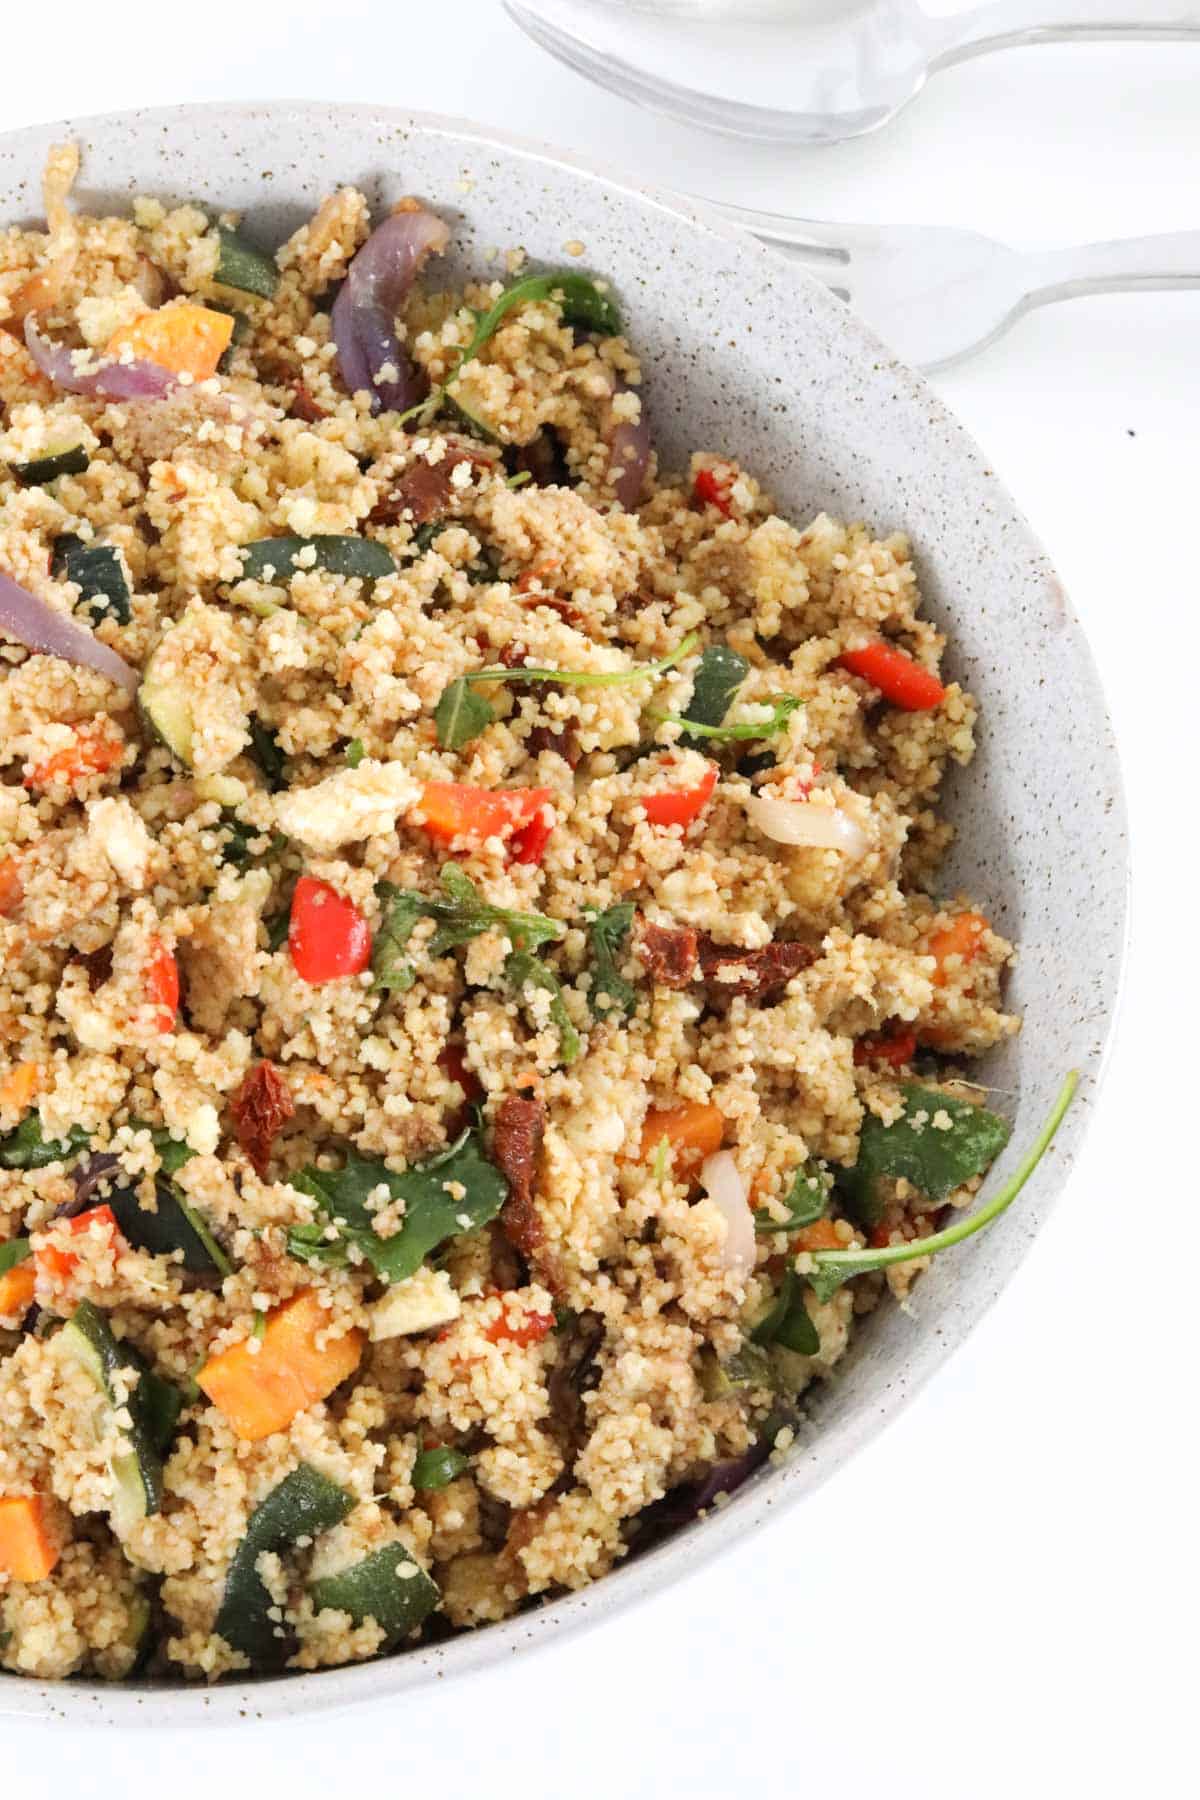 A close up image of roasted vegetable and couscous salad in a speckled bowl with salad servers just visible on the bench in the background